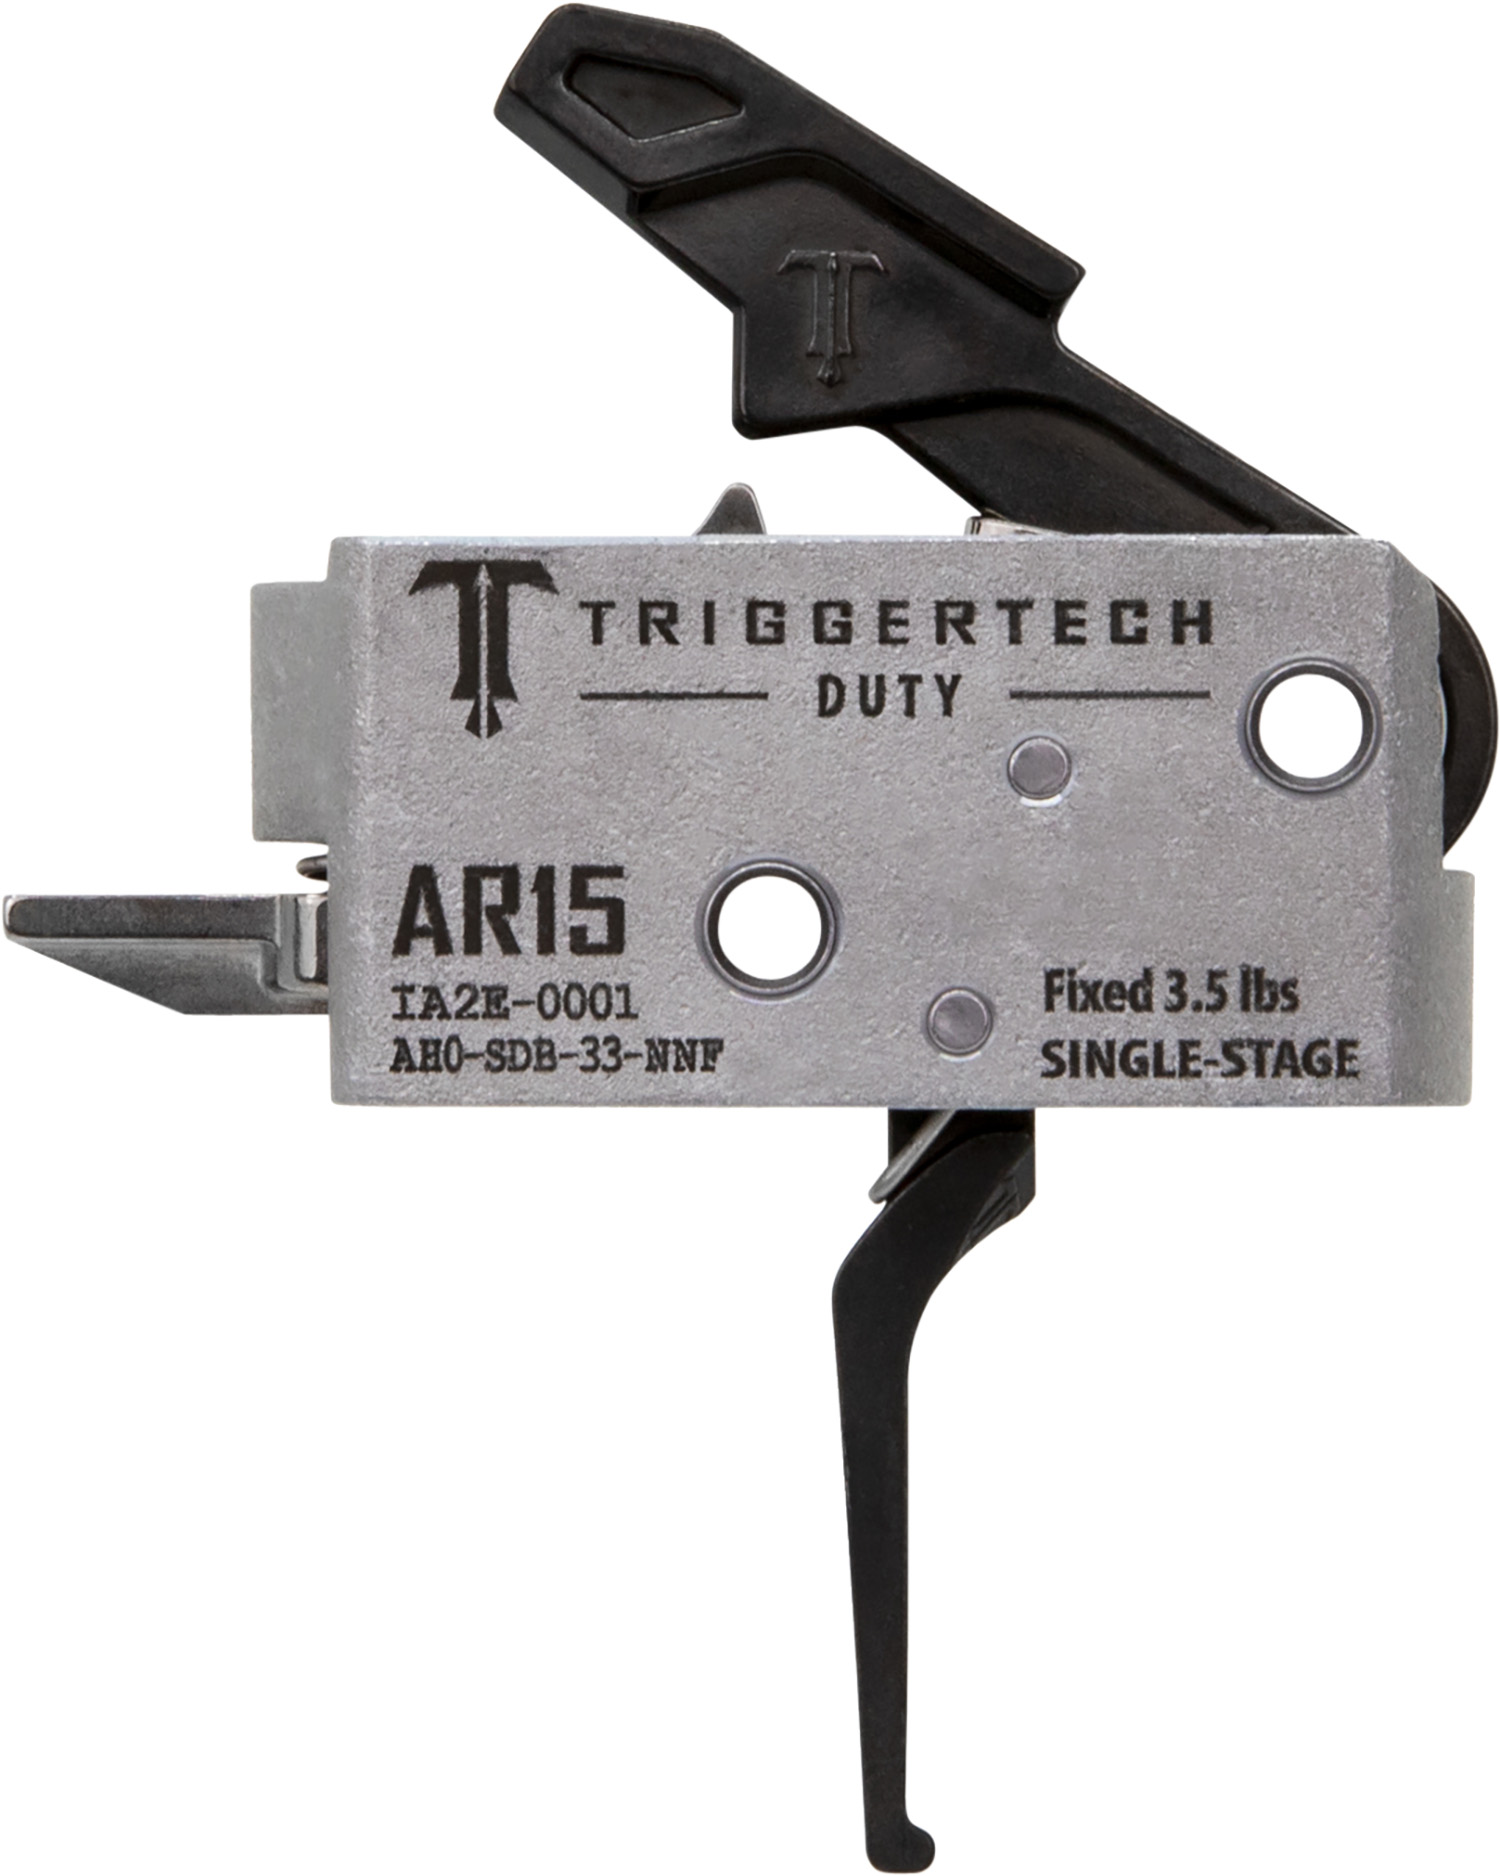 TriggerTech Ah0SDB33NNF Duty Flat Single-Stage 3.50 Lbs Draw Weight Fits AR-15